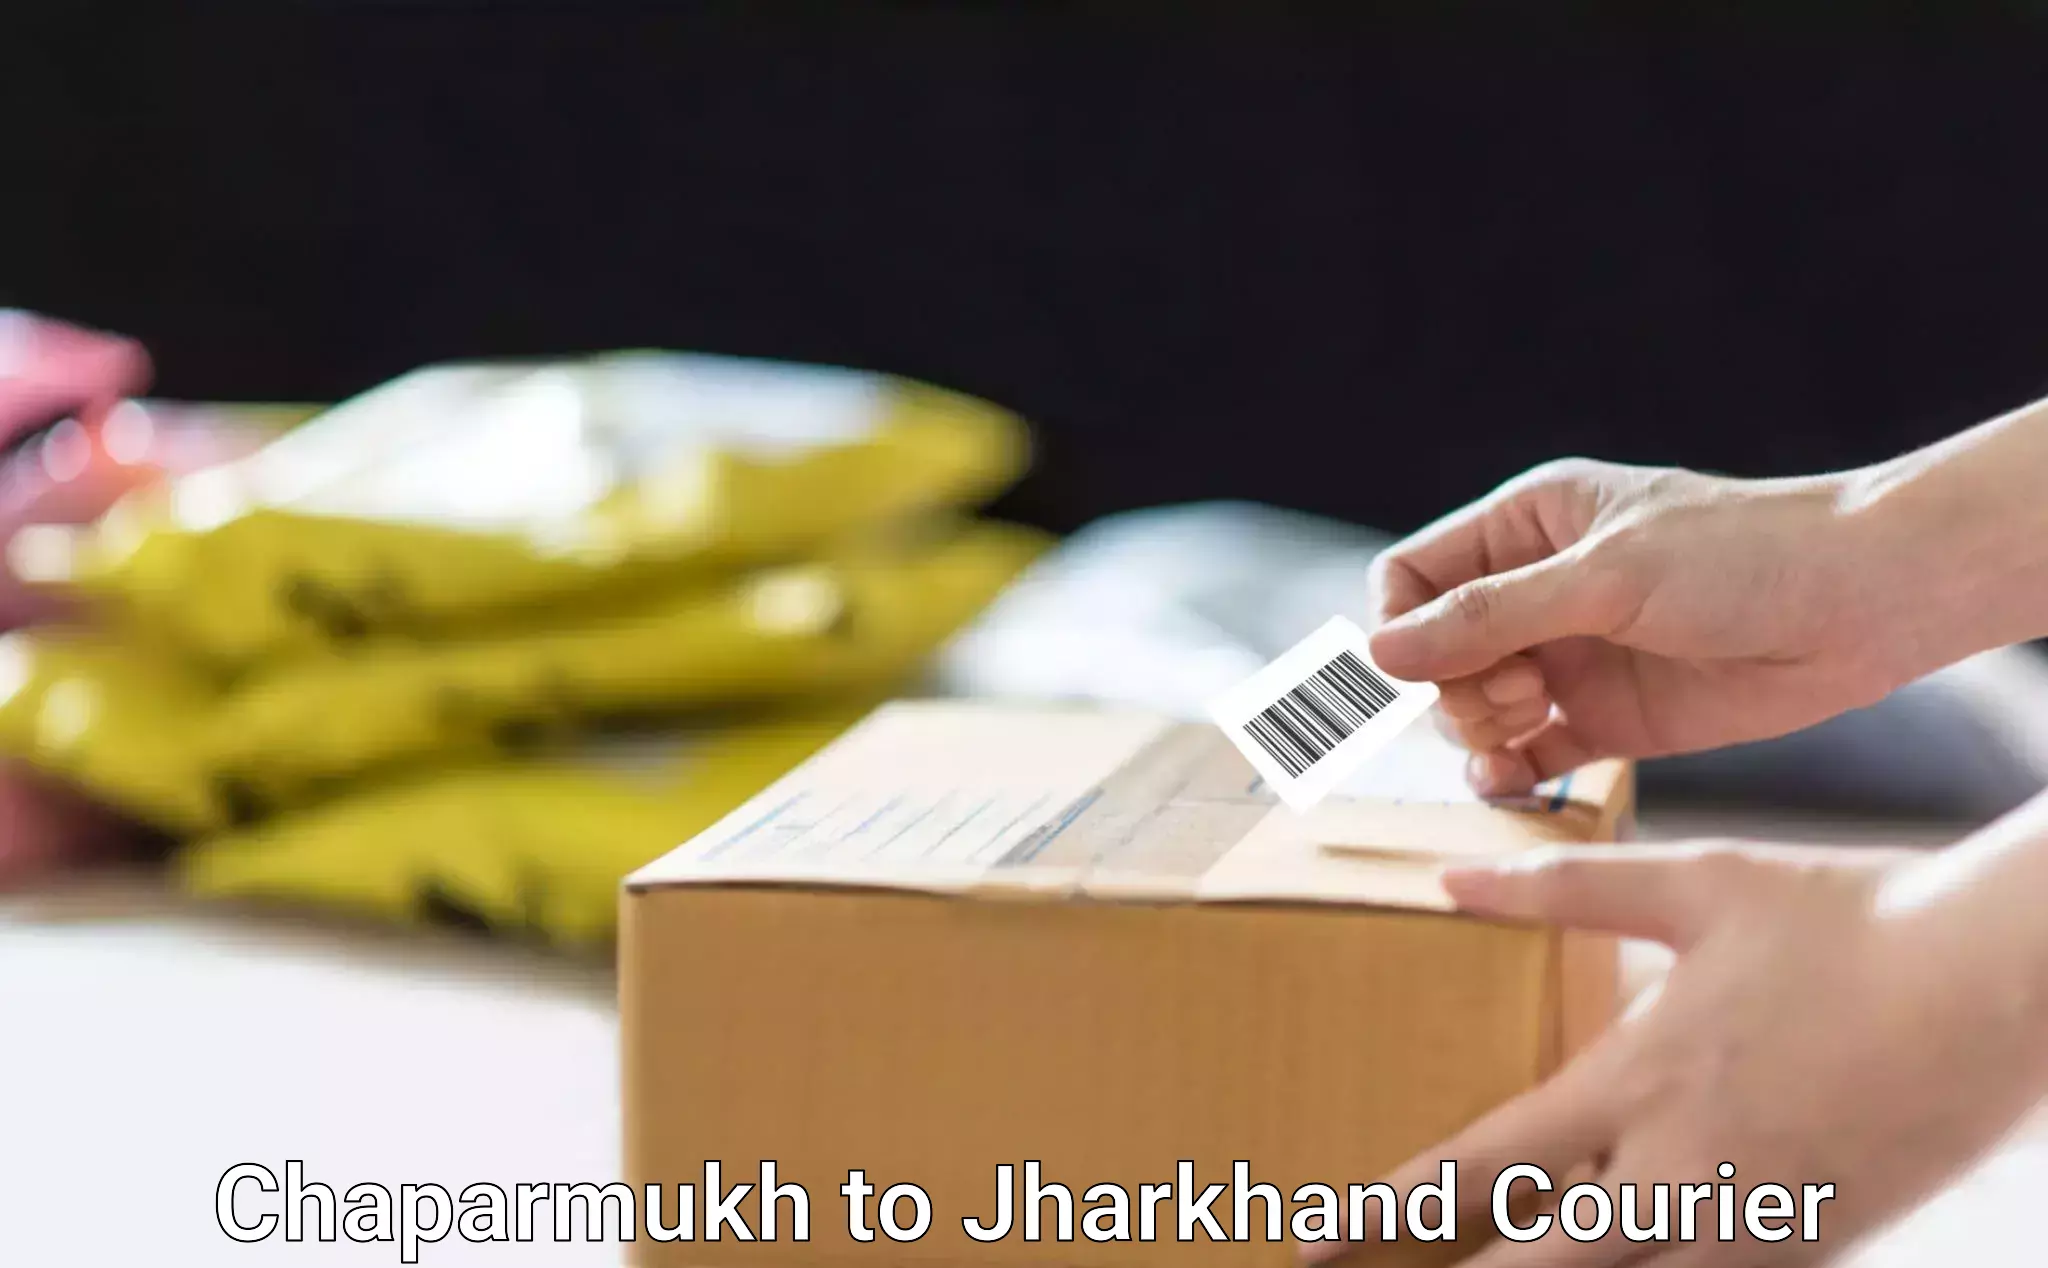 Modern courier technology Chaparmukh to Jharkhand